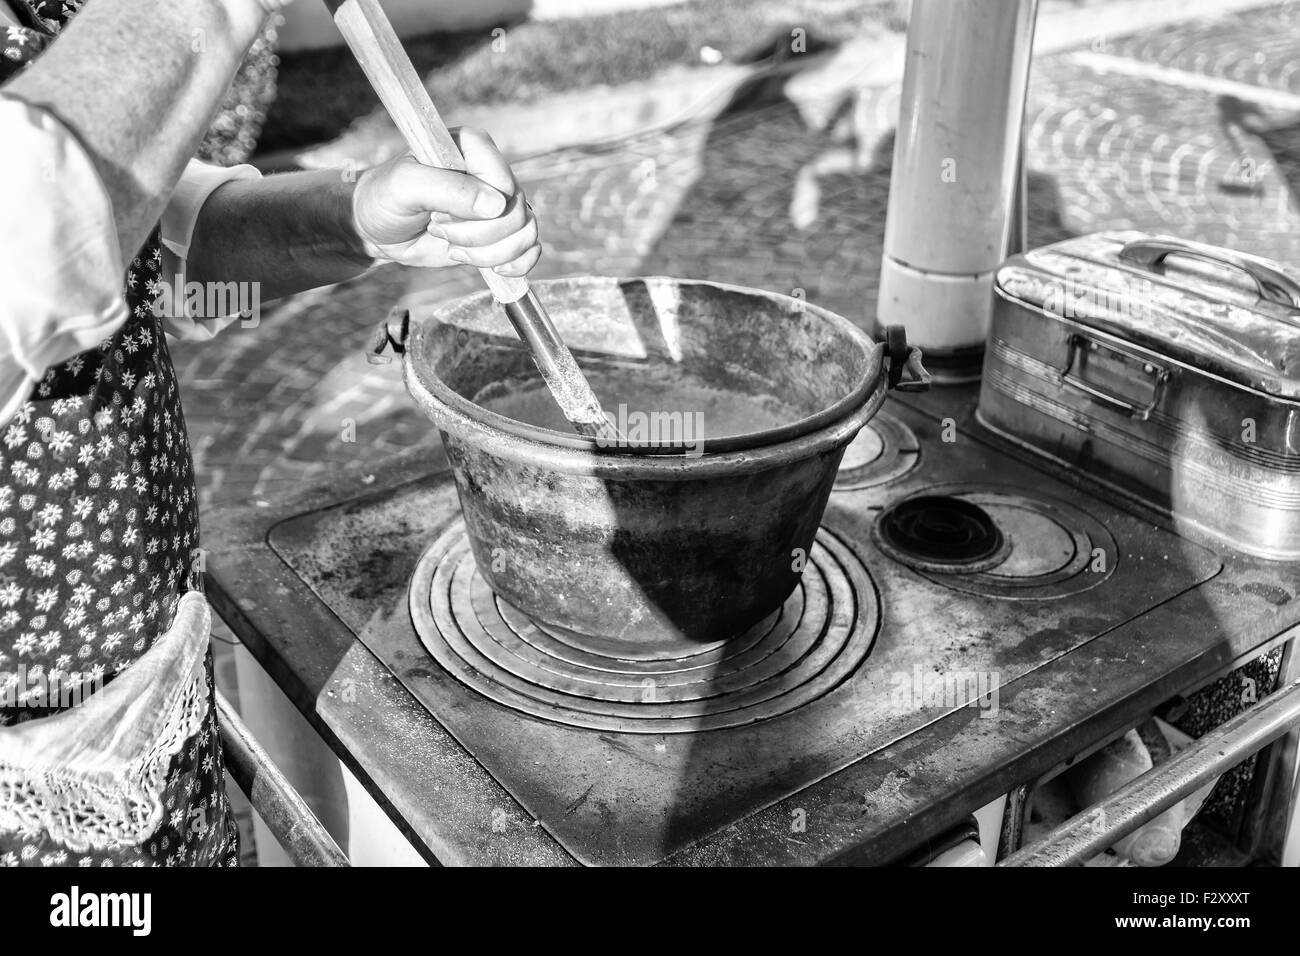 Cooking polenta in a copper pot on wood stove (dish of the Venetian tradition, Italy). Stock Photo